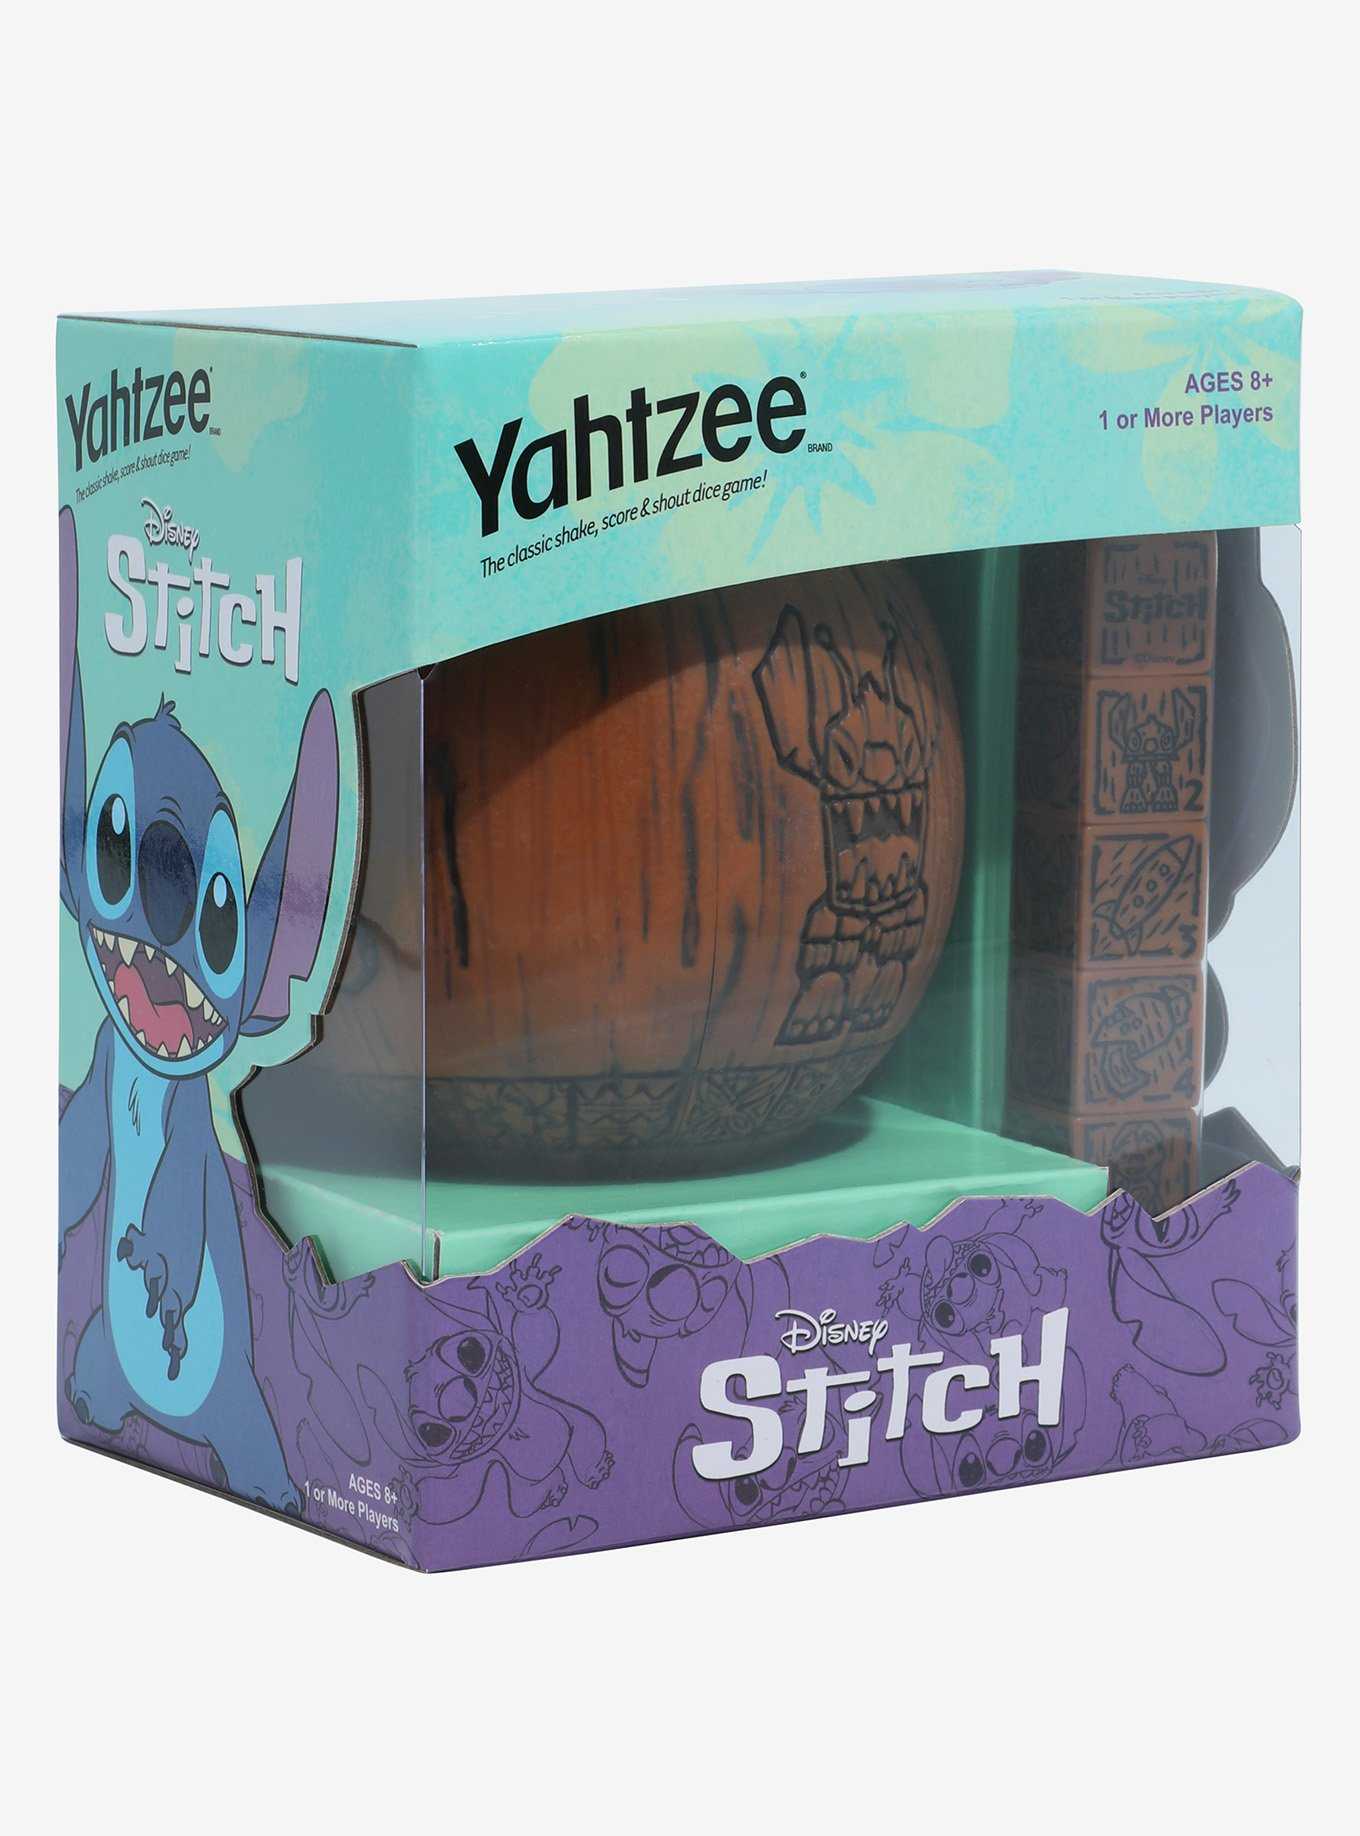 OFFICIAL Lilo And Stitch Novelty